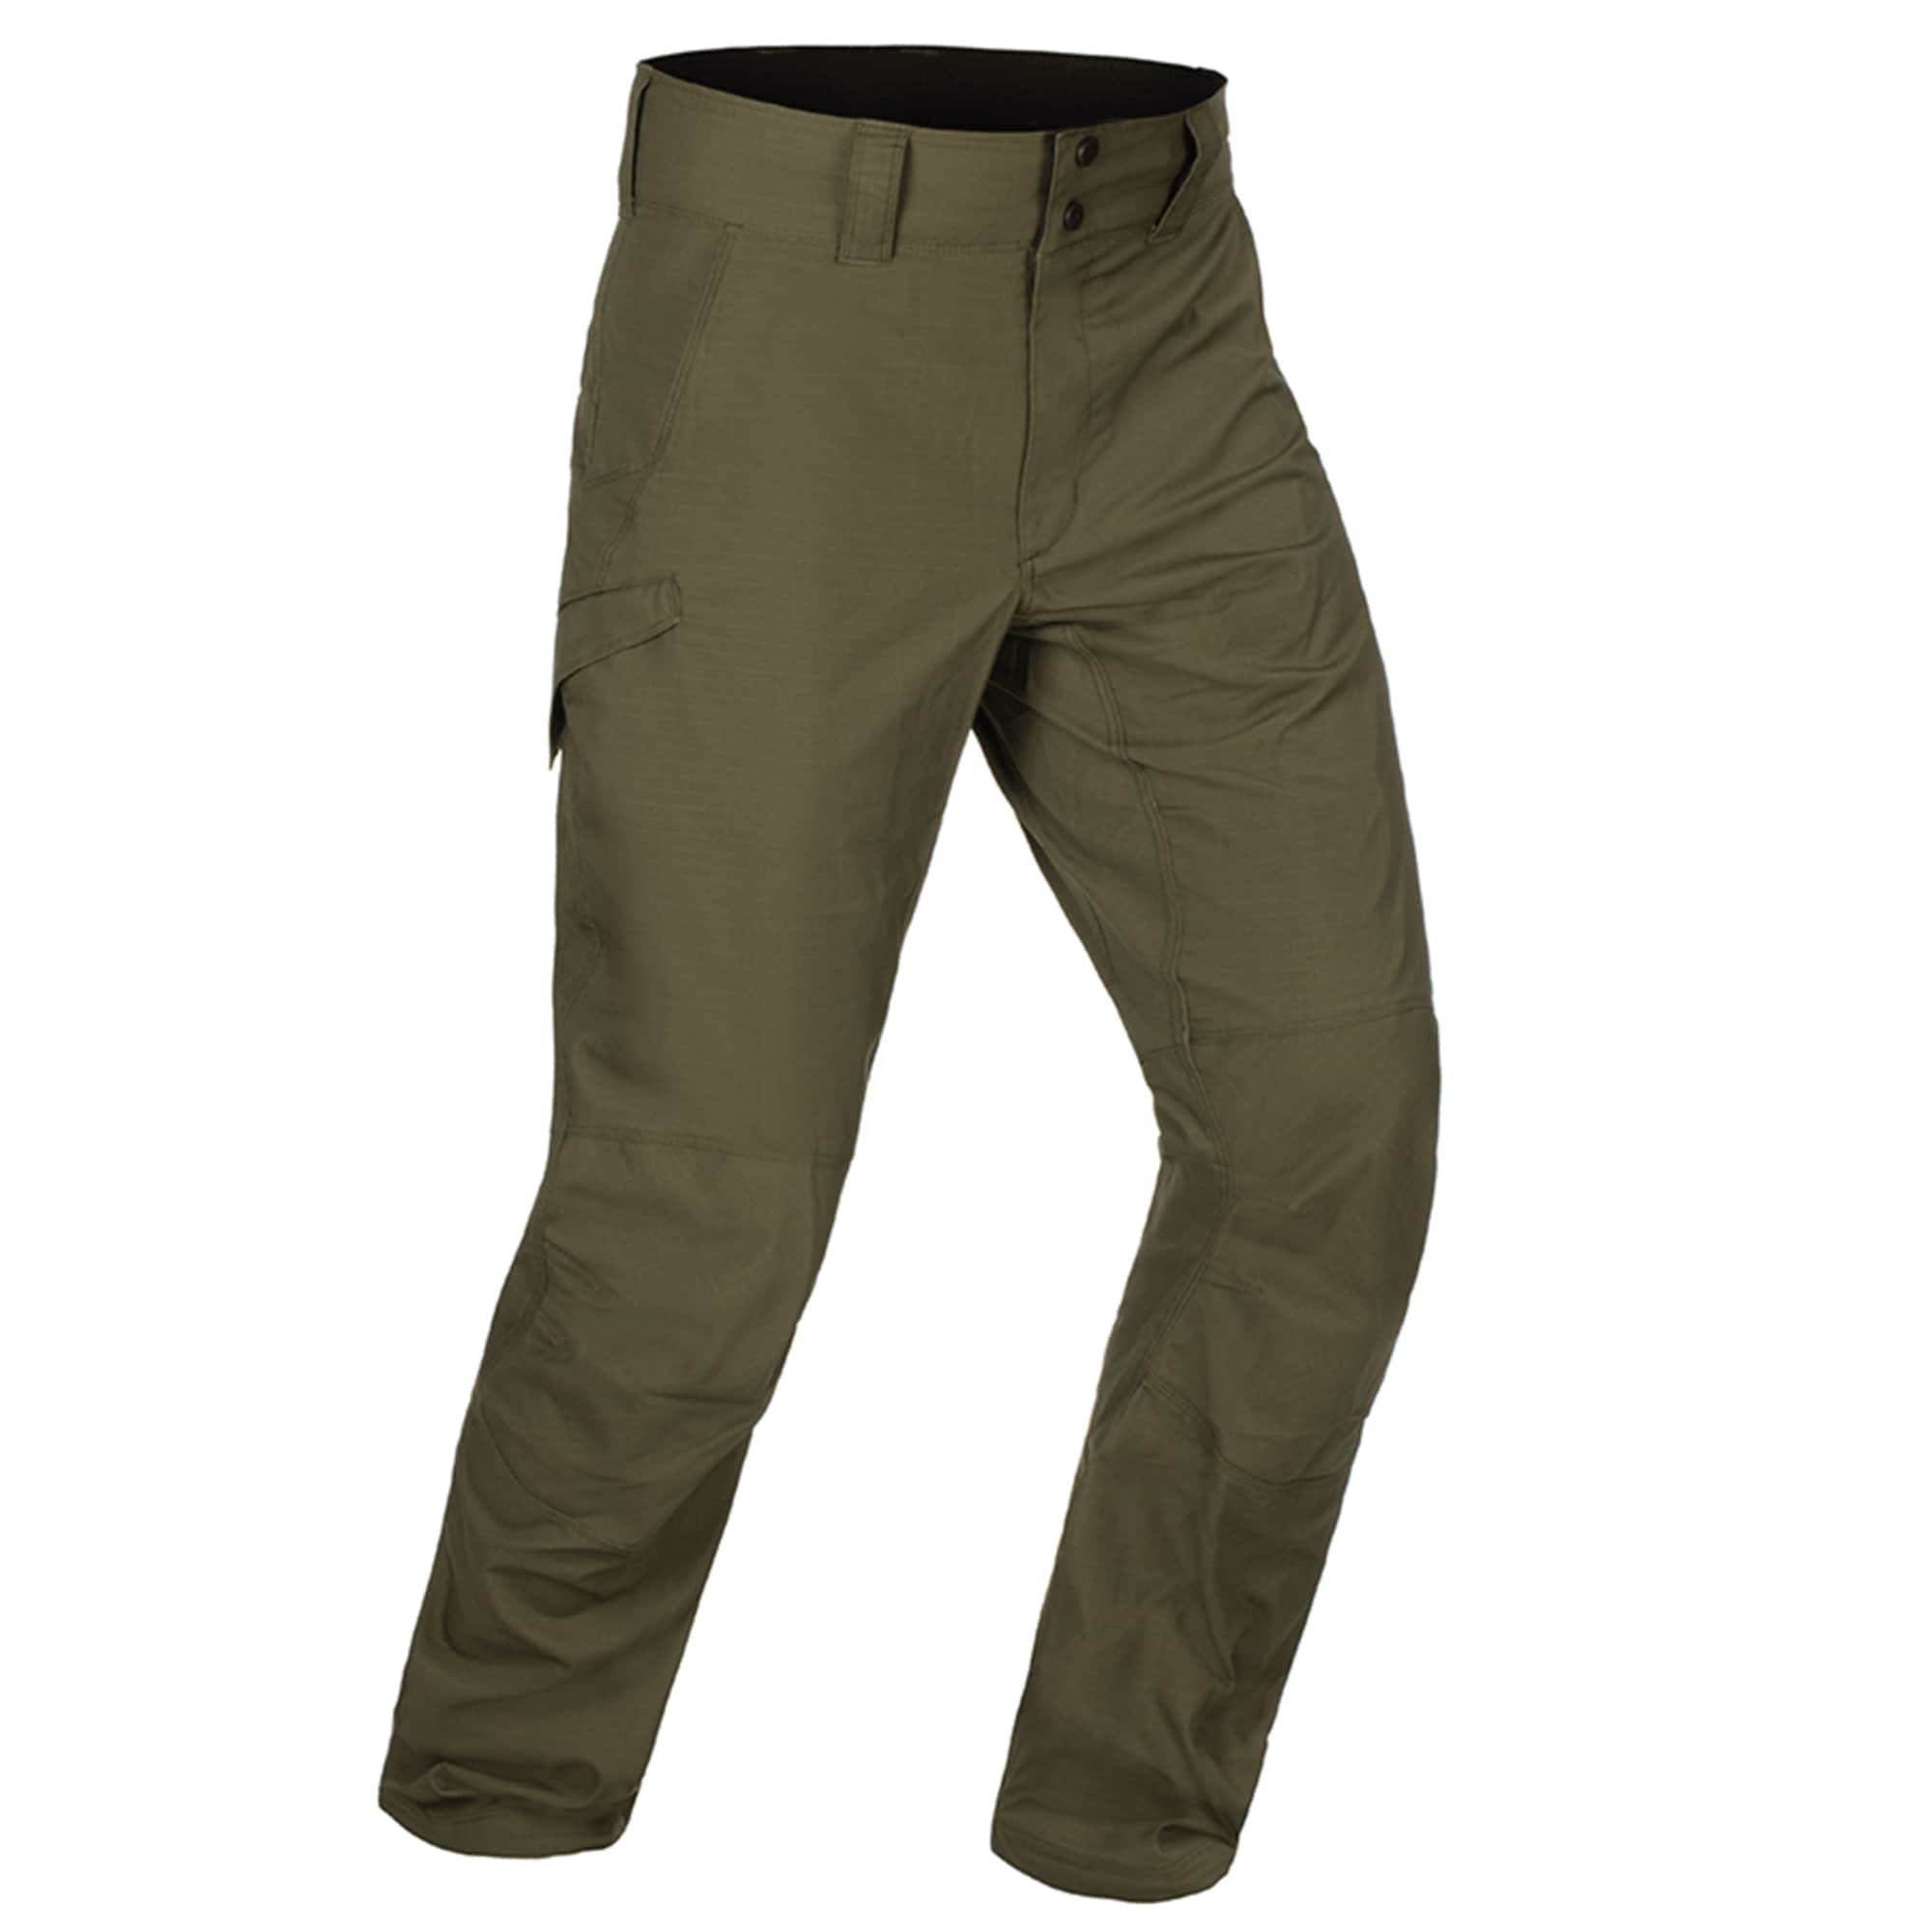 Purchase the Clawgear Tactical Pant Defiant Flex stone grey oliv